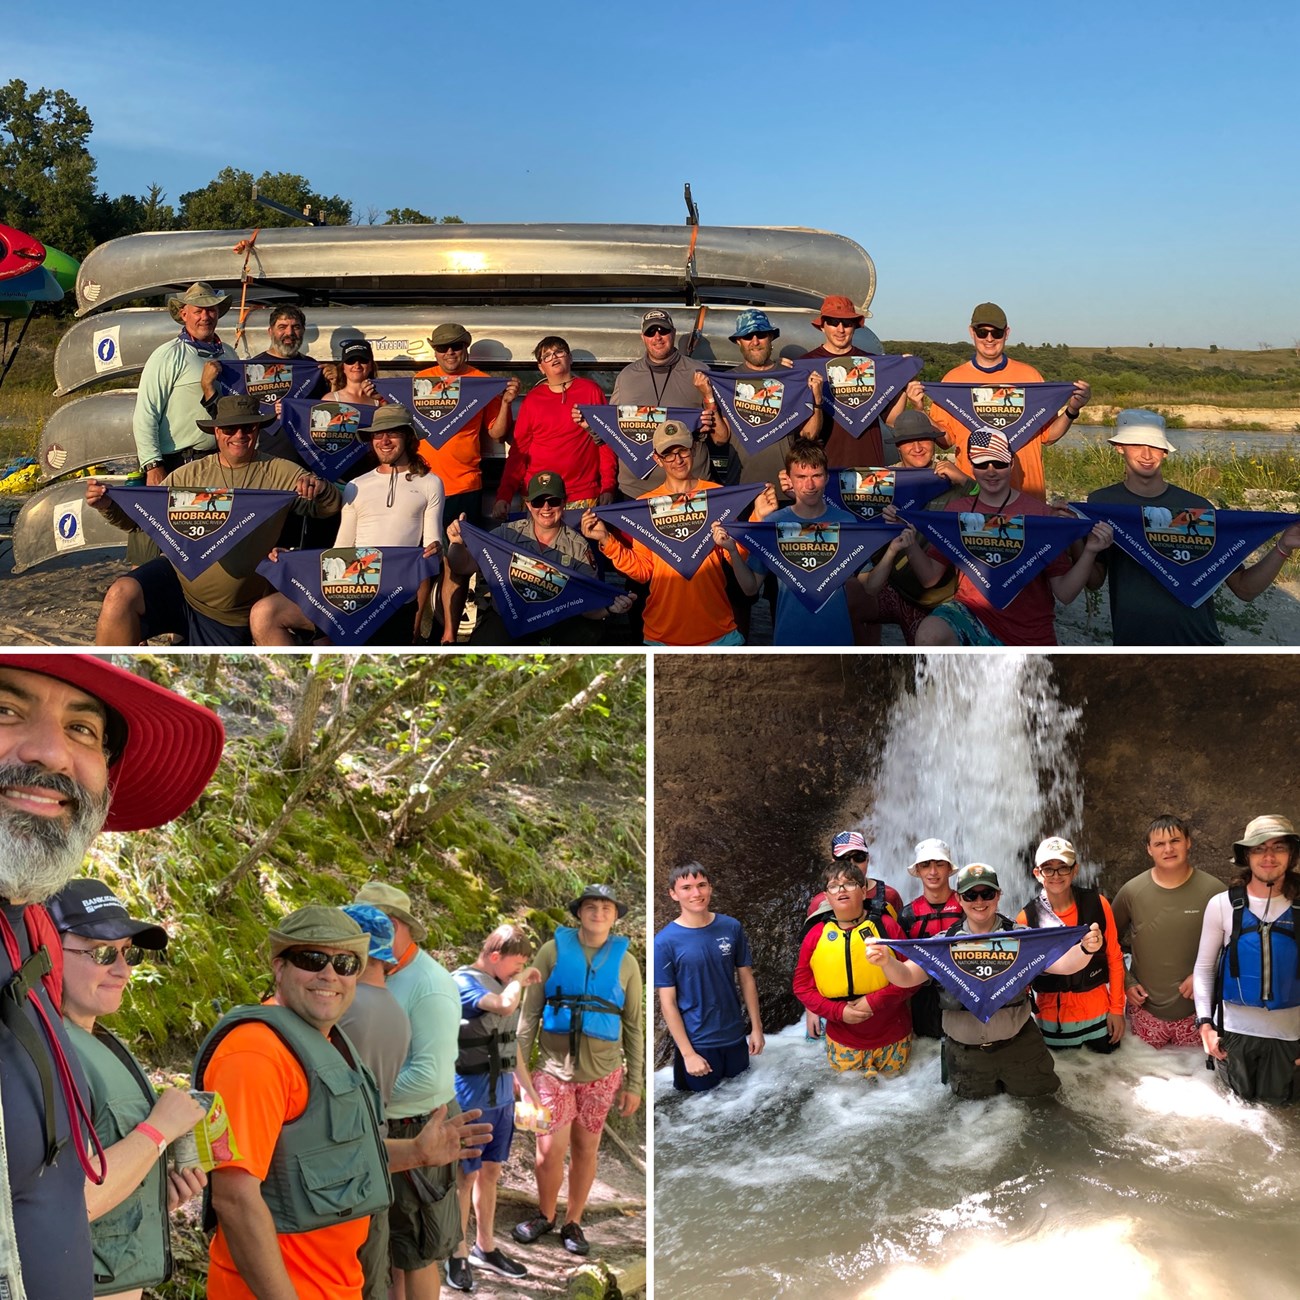 A compilation of three images showing a boy scot troop with their Niobrara River Challenge bandanas. Top image show the troop in front of canoes on a trailer, bottom left shows troop on the riverbank, and bottom right shows troop in front of a waterfall